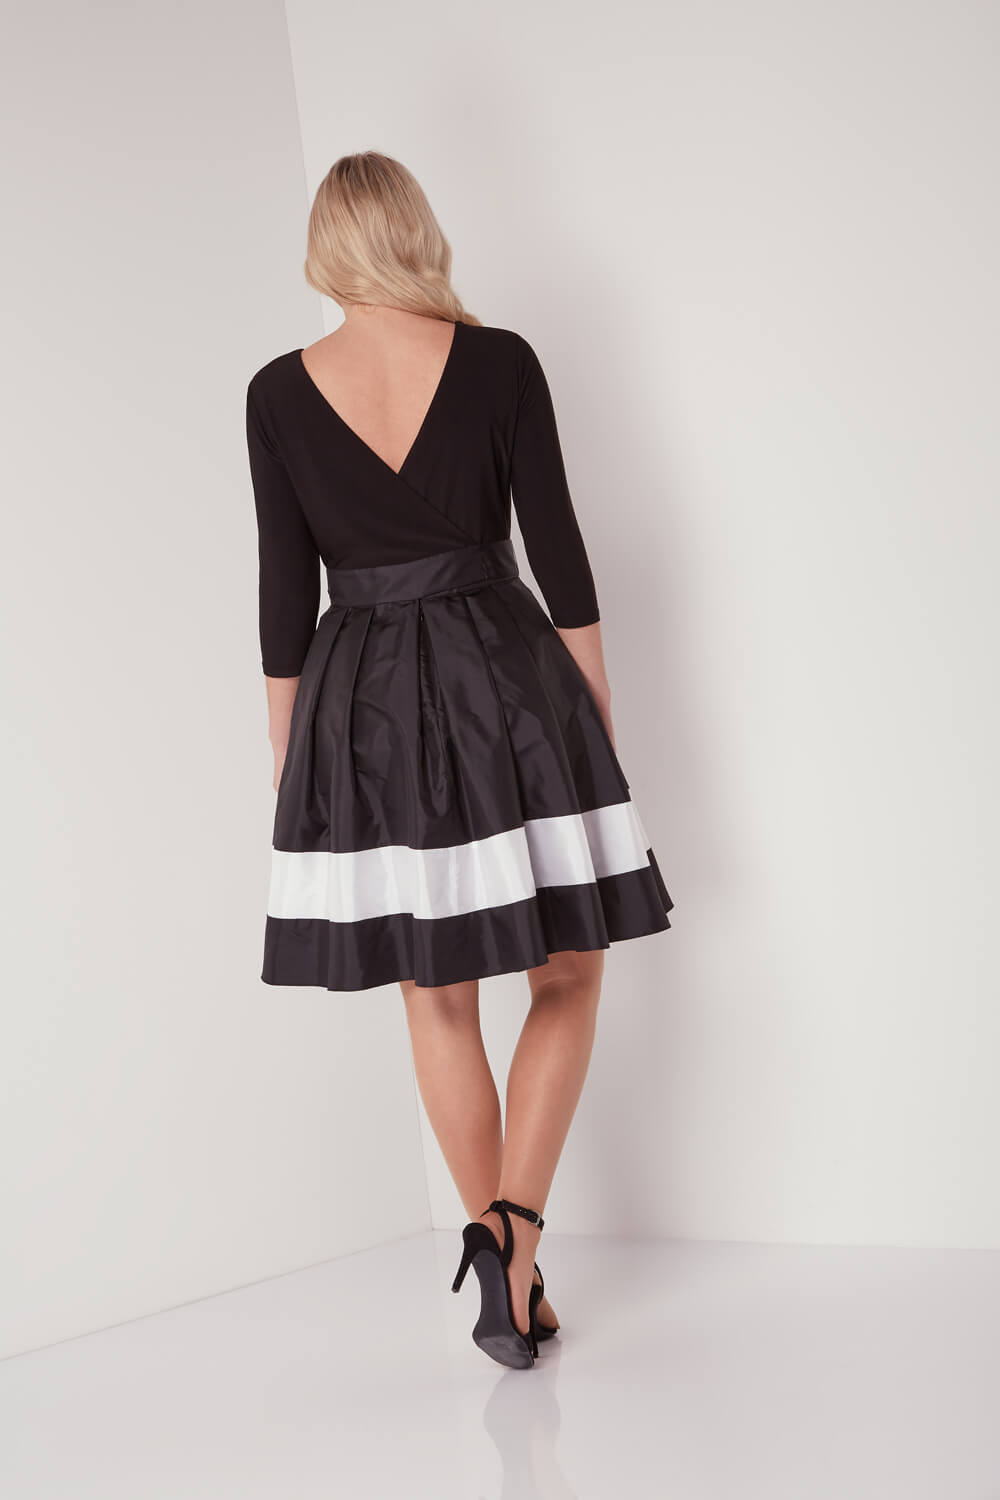 Black Contrast Fit and Flare Dress with Belt, Image 2 of 3